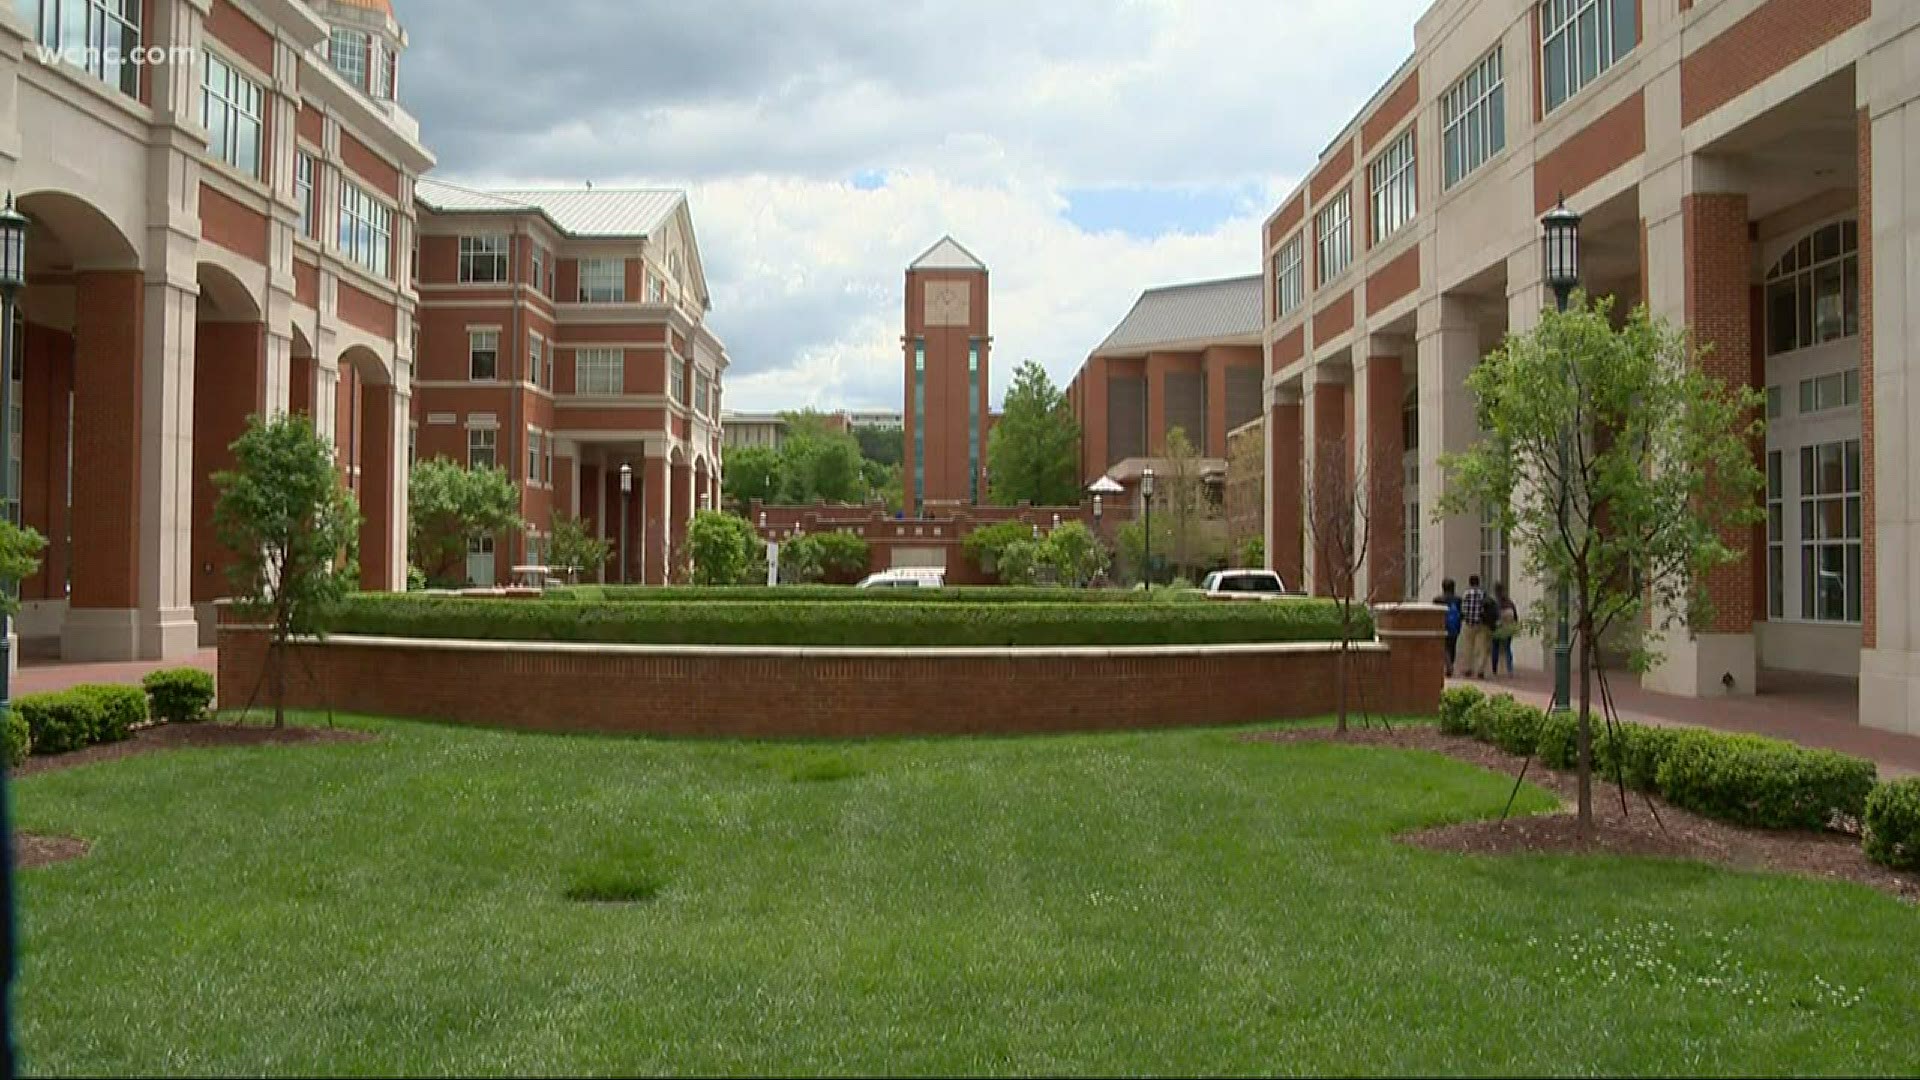 The university is preparing for what could be the largest incoming freshman class ever.